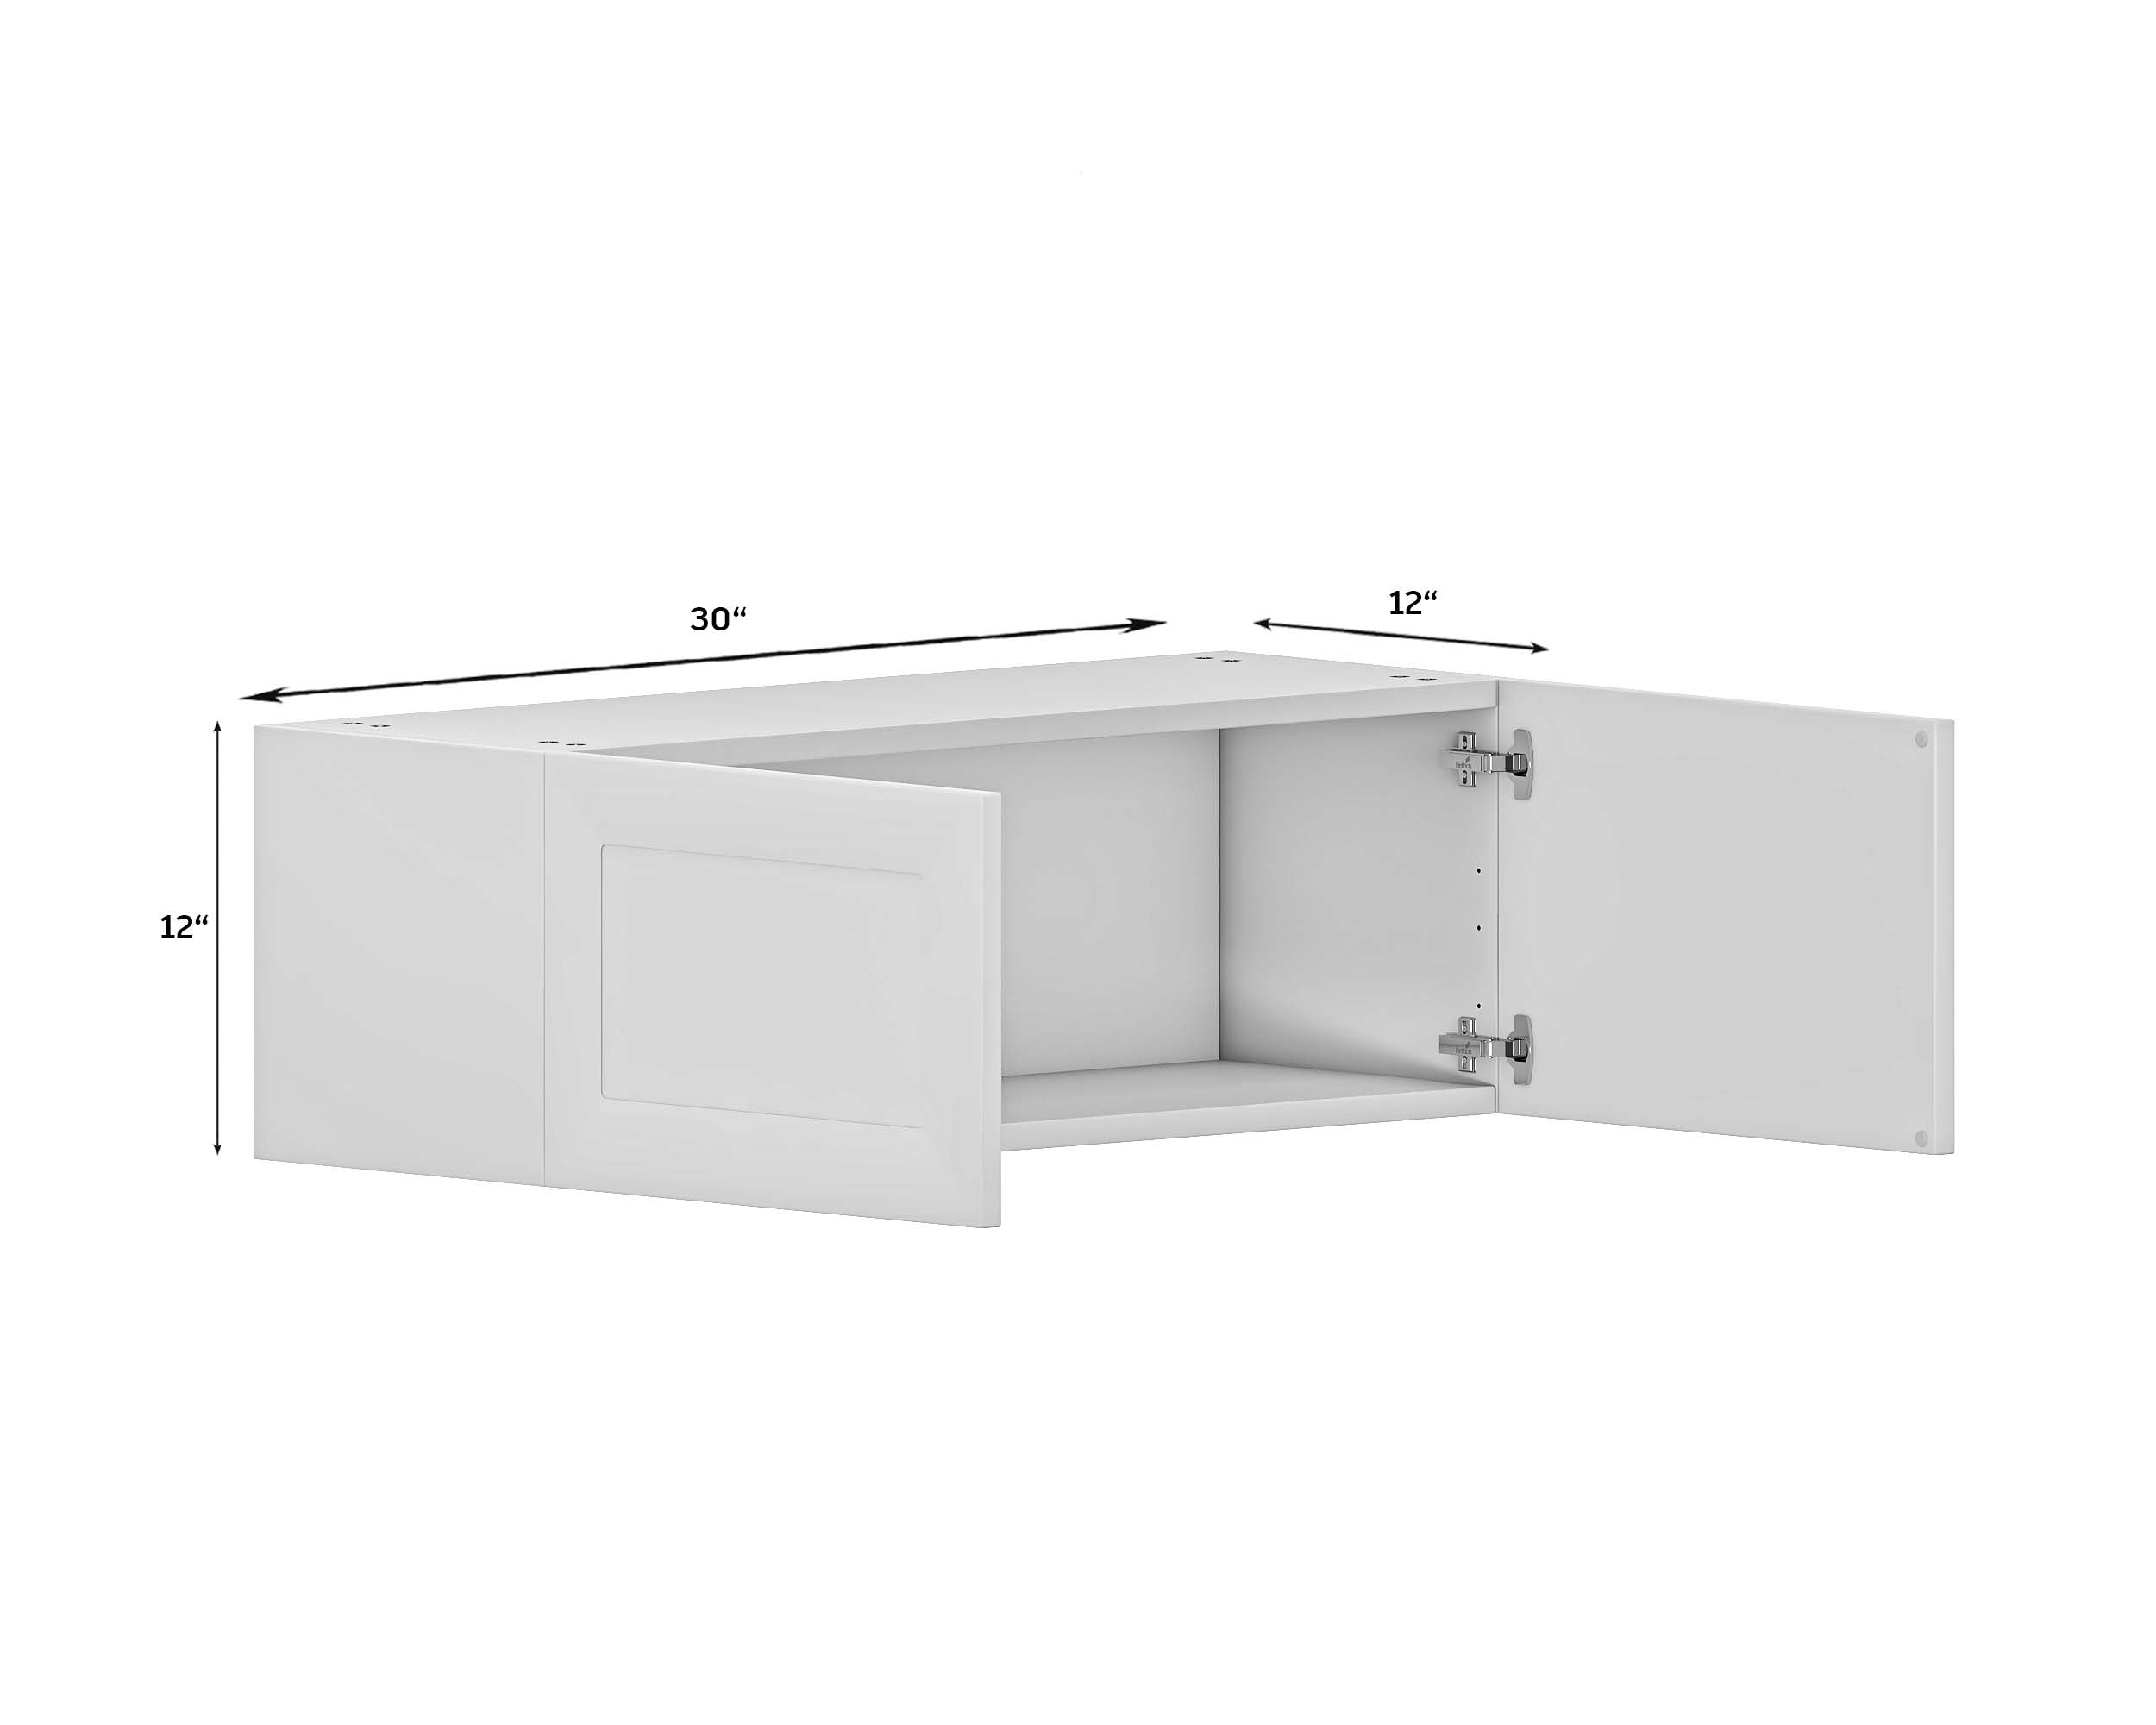 Quick Assemble Modern Style with Soft Close, White Shaker Wall Bridge Kitchen Cabinet (30 in W x 12 in H x 12 in D) -  Pro-Edge HD